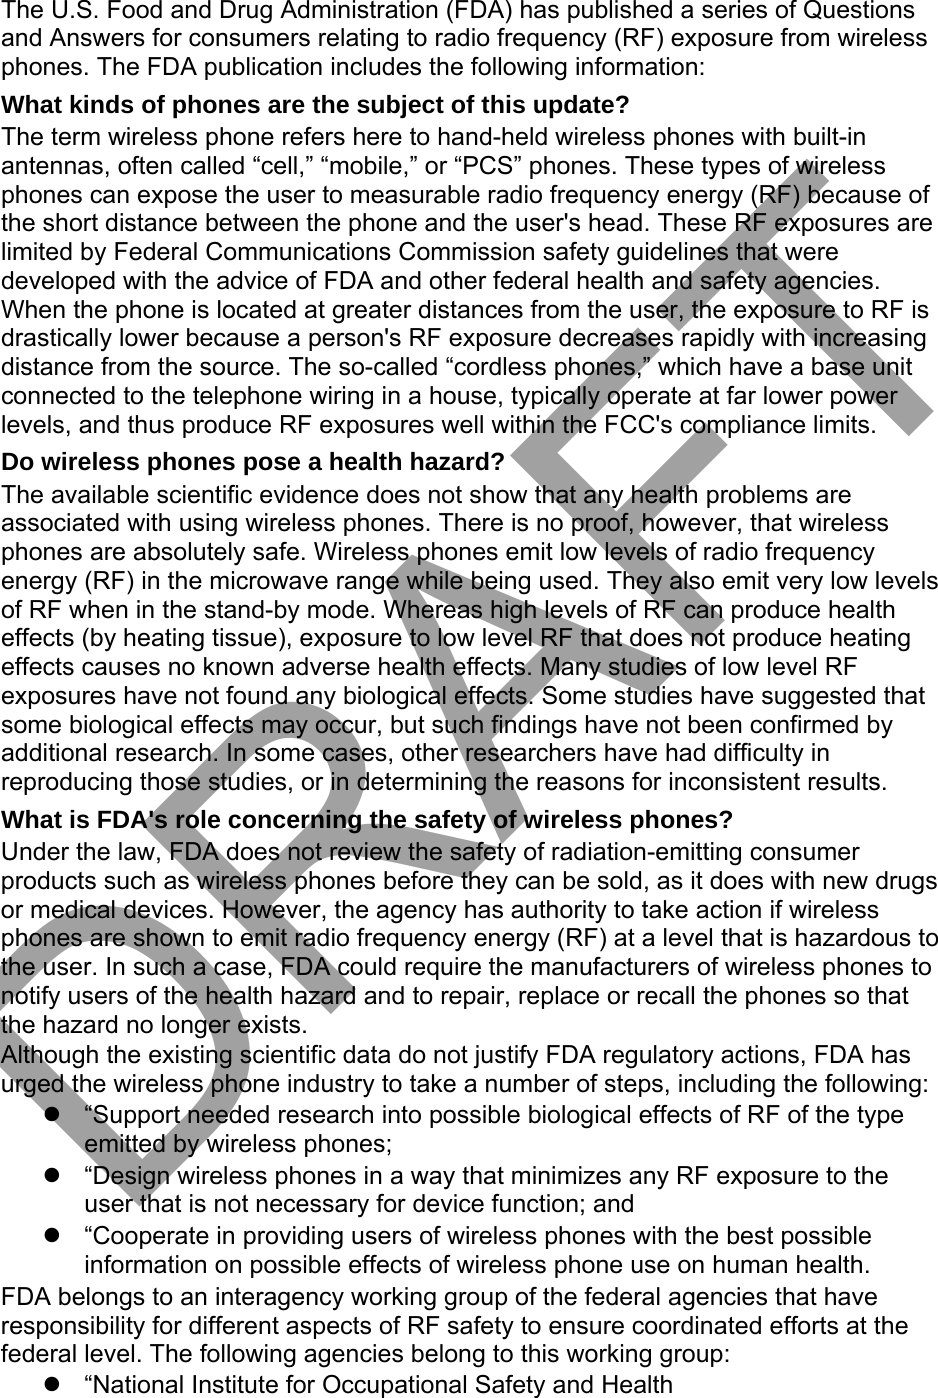 The U.S. Food and Drug Administration (FDA) has published a series of Questions and Answers for consumers relating to radio frequency (RF) exposure from wireless phones. The FDA publication includes the following information: What kinds of phones are the subject of this update? The term wireless phone refers here to hand-held wireless phones with built-in antennas, often called “cell,” “mobile,” or “PCS” phones. These types of wireless phones can expose the user to measurable radio frequency energy (RF) because of the short distance between the phone and the user&apos;s head. These RF exposures are limited by Federal Communications Commission safety guidelines that were developed with the advice of FDA and other federal health and safety agencies. When the phone is located at greater distances from the user, the exposure to RF is drastically lower because a person&apos;s RF exposure decreases rapidly with increasing distance from the source. The so-called “cordless phones,” which have a base unit connected to the telephone wiring in a house, typically operate at far lower power levels, and thus produce RF exposures well within the FCC&apos;s compliance limits. Do wireless phones pose a health hazard? The available scientific evidence does not show that any health problems are associated with using wireless phones. There is no proof, however, that wireless phones are absolutely safe. Wireless phones emit low levels of radio frequency energy (RF) in the microwave range while being used. They also emit very low levels of RF when in the stand-by mode. Whereas high levels of RF can produce health effects (by heating tissue), exposure to low level RF that does not produce heating effects causes no known adverse health effects. Many studies of low level RF exposures have not found any biological effects. Some studies have suggested that some biological effects may occur, but such findings have not been confirmed by additional research. In some cases, other researchers have had difficulty in reproducing those studies, or in determining the reasons for inconsistent results. What is FDA&apos;s role concerning the safety of wireless phones? Under the law, FDA does not review the safety of radiation-emitting consumer products such as wireless phones before they can be sold, as it does with new drugs or medical devices. However, the agency has authority to take action if wireless phones are shown to emit radio frequency energy (RF) at a level that is hazardous to the user. In such a case, FDA could require the manufacturers of wireless phones to notify users of the health hazard and to repair, replace or recall the phones so that the hazard no longer exists. Although the existing scientific data do not justify FDA regulatory actions, FDA has urged the wireless phone industry to take a number of steps, including the following: “Support needed research into possible biological effects of RF of the typeemitted by wireless phones;“Design wireless phones in a way that minimizes any RF exposure to theuser that is not necessary for device function; and“Cooperate in providing users of wireless phones with the best possibleinformation on possible effects of wireless phone use on human health.FDA belongs to an interagency working group of the federal agencies that have responsibility for different aspects of RF safety to ensure coordinated efforts at the federal level. The following agencies belong to this working group: “National Institute for Occupational Safety and HealthDRAFT